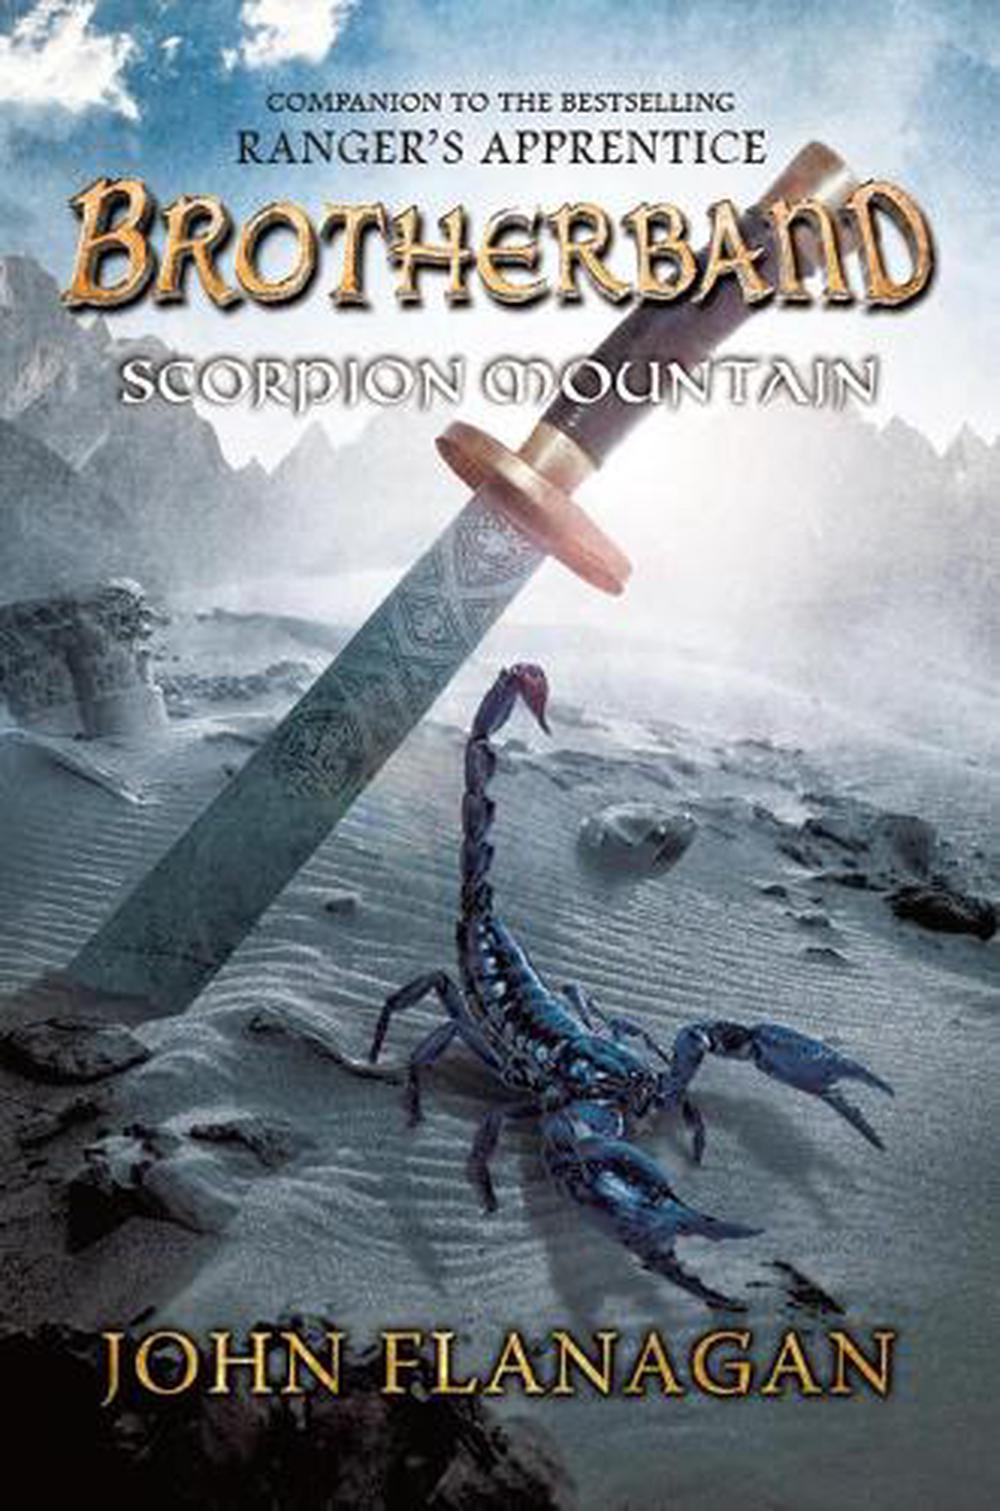 brotherband book 2 read online